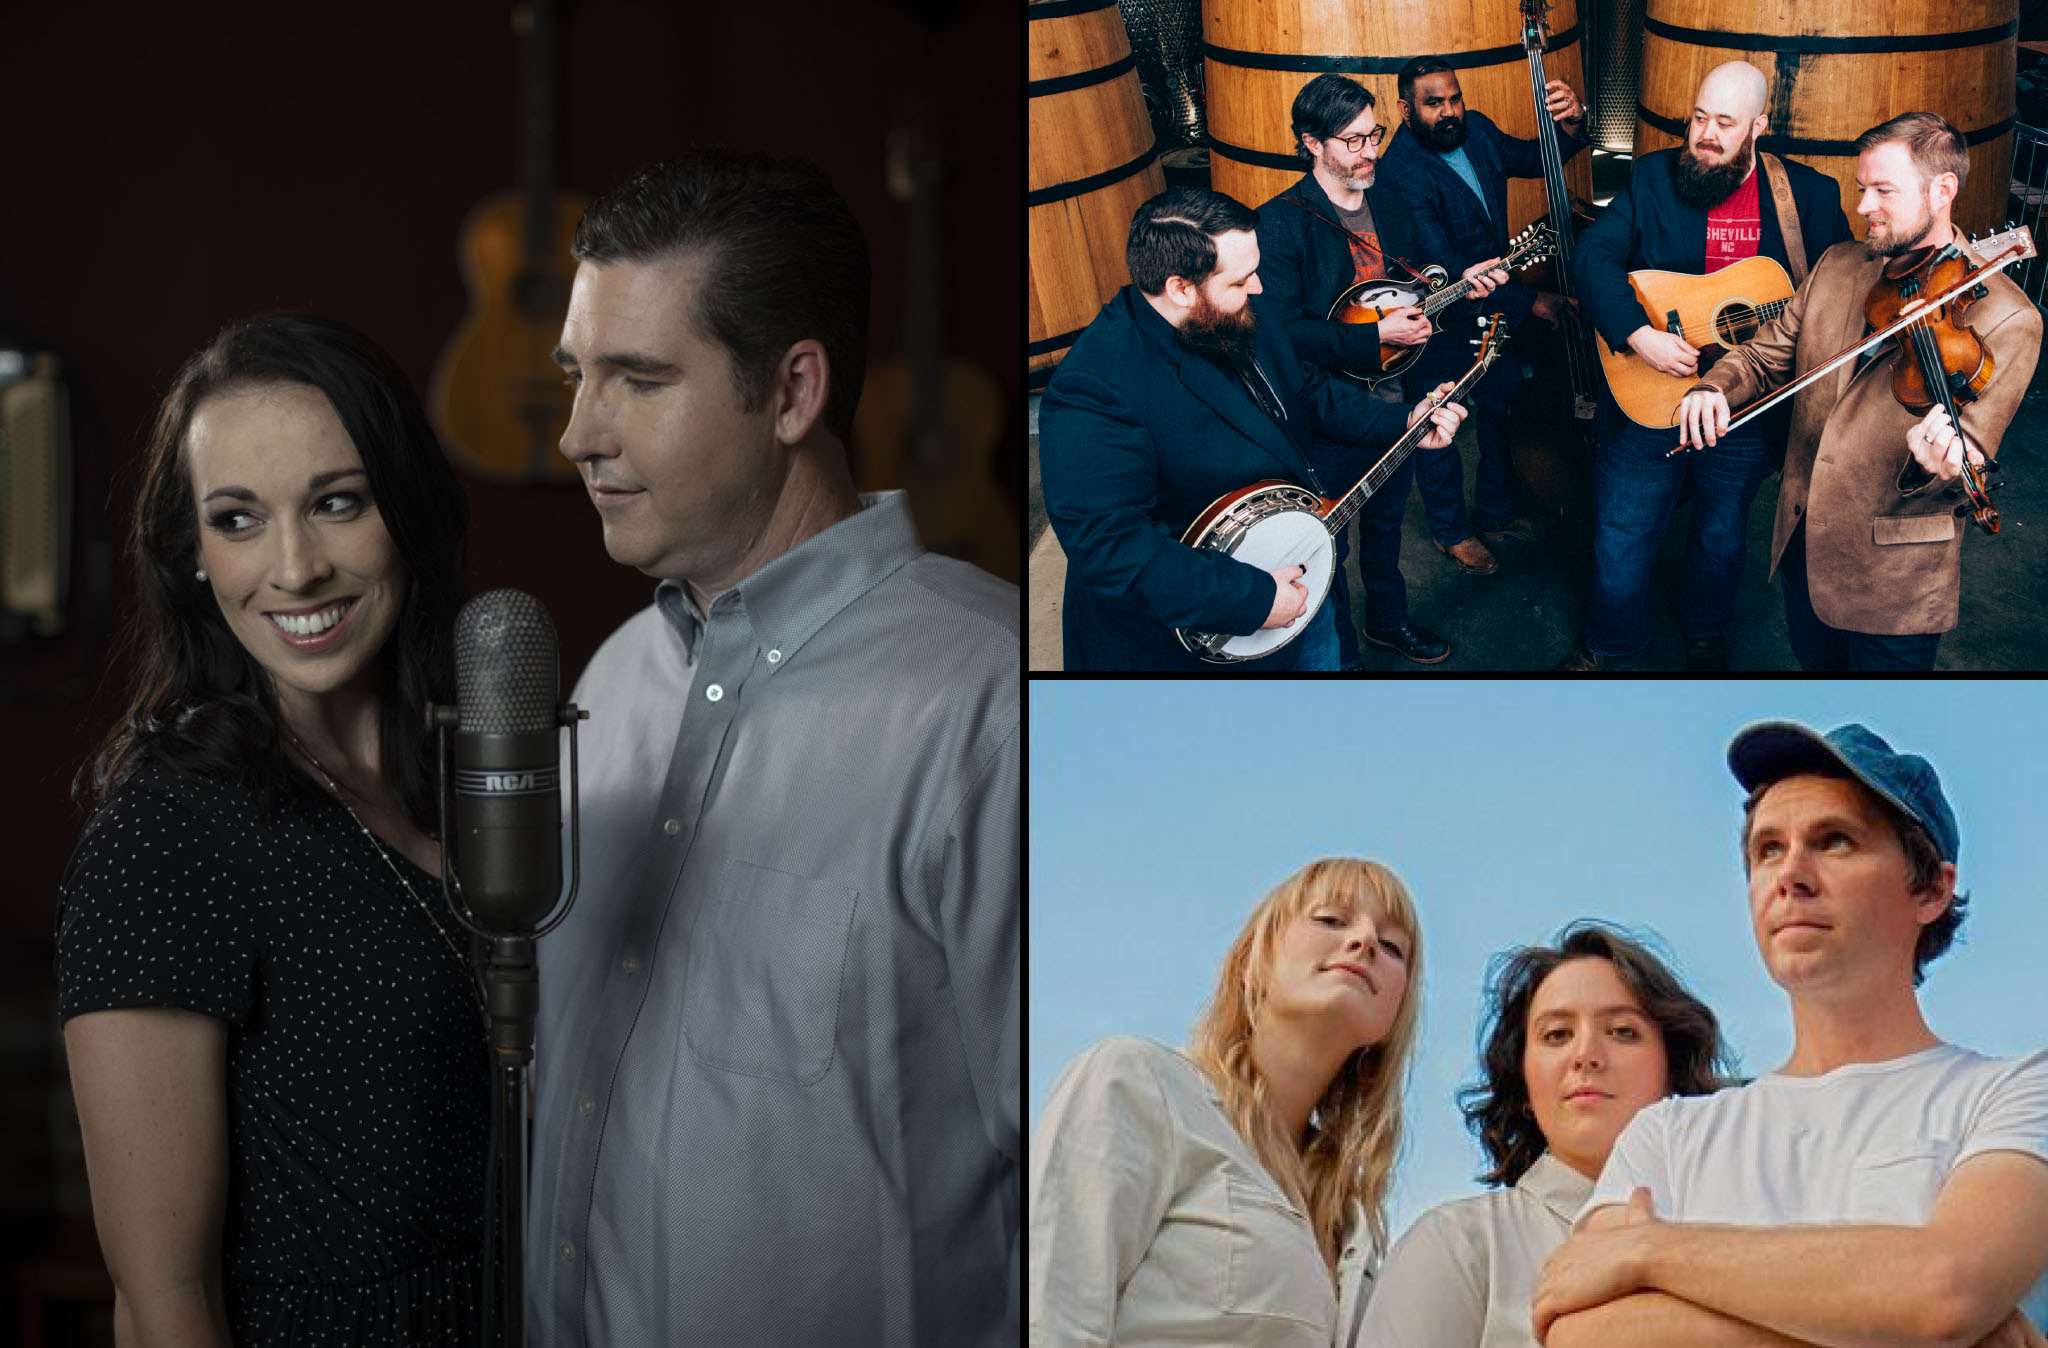 Photos of Darin & Brooke Aldridge, the band Unspoken Tradition, and Bill and the Belles.